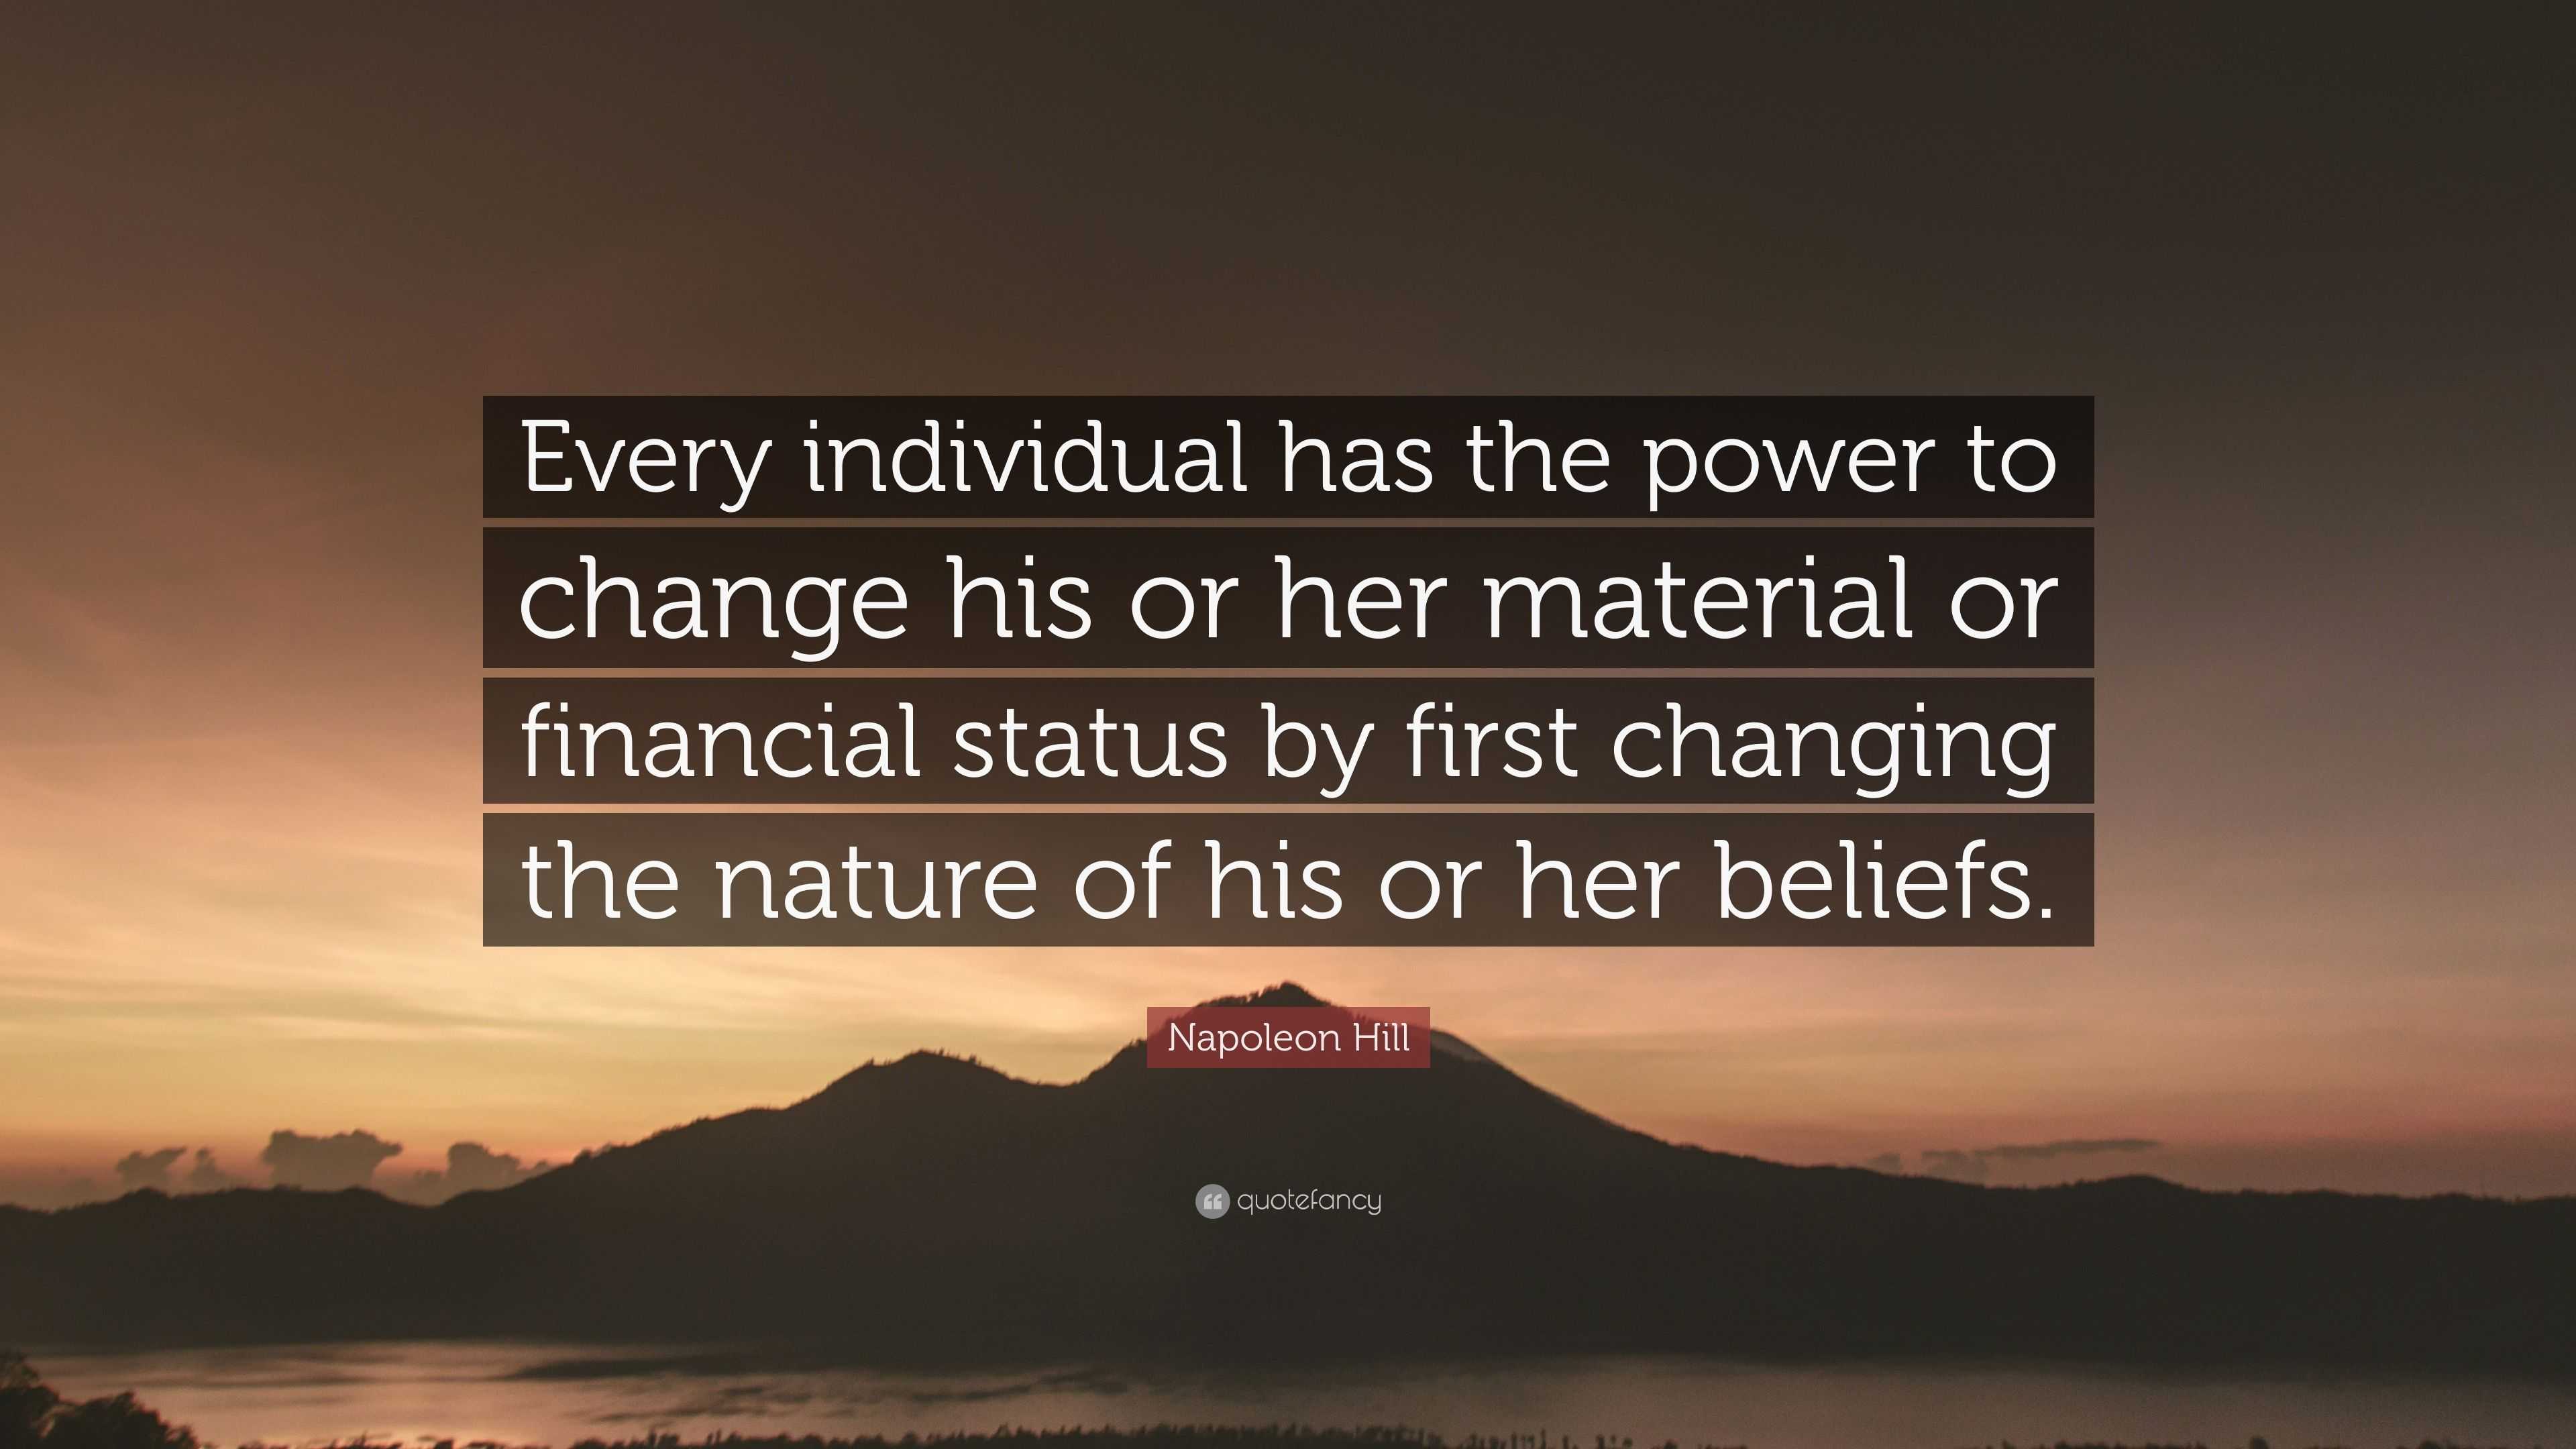 Napoleon Hill Quote: “Every individual has the power to change his or